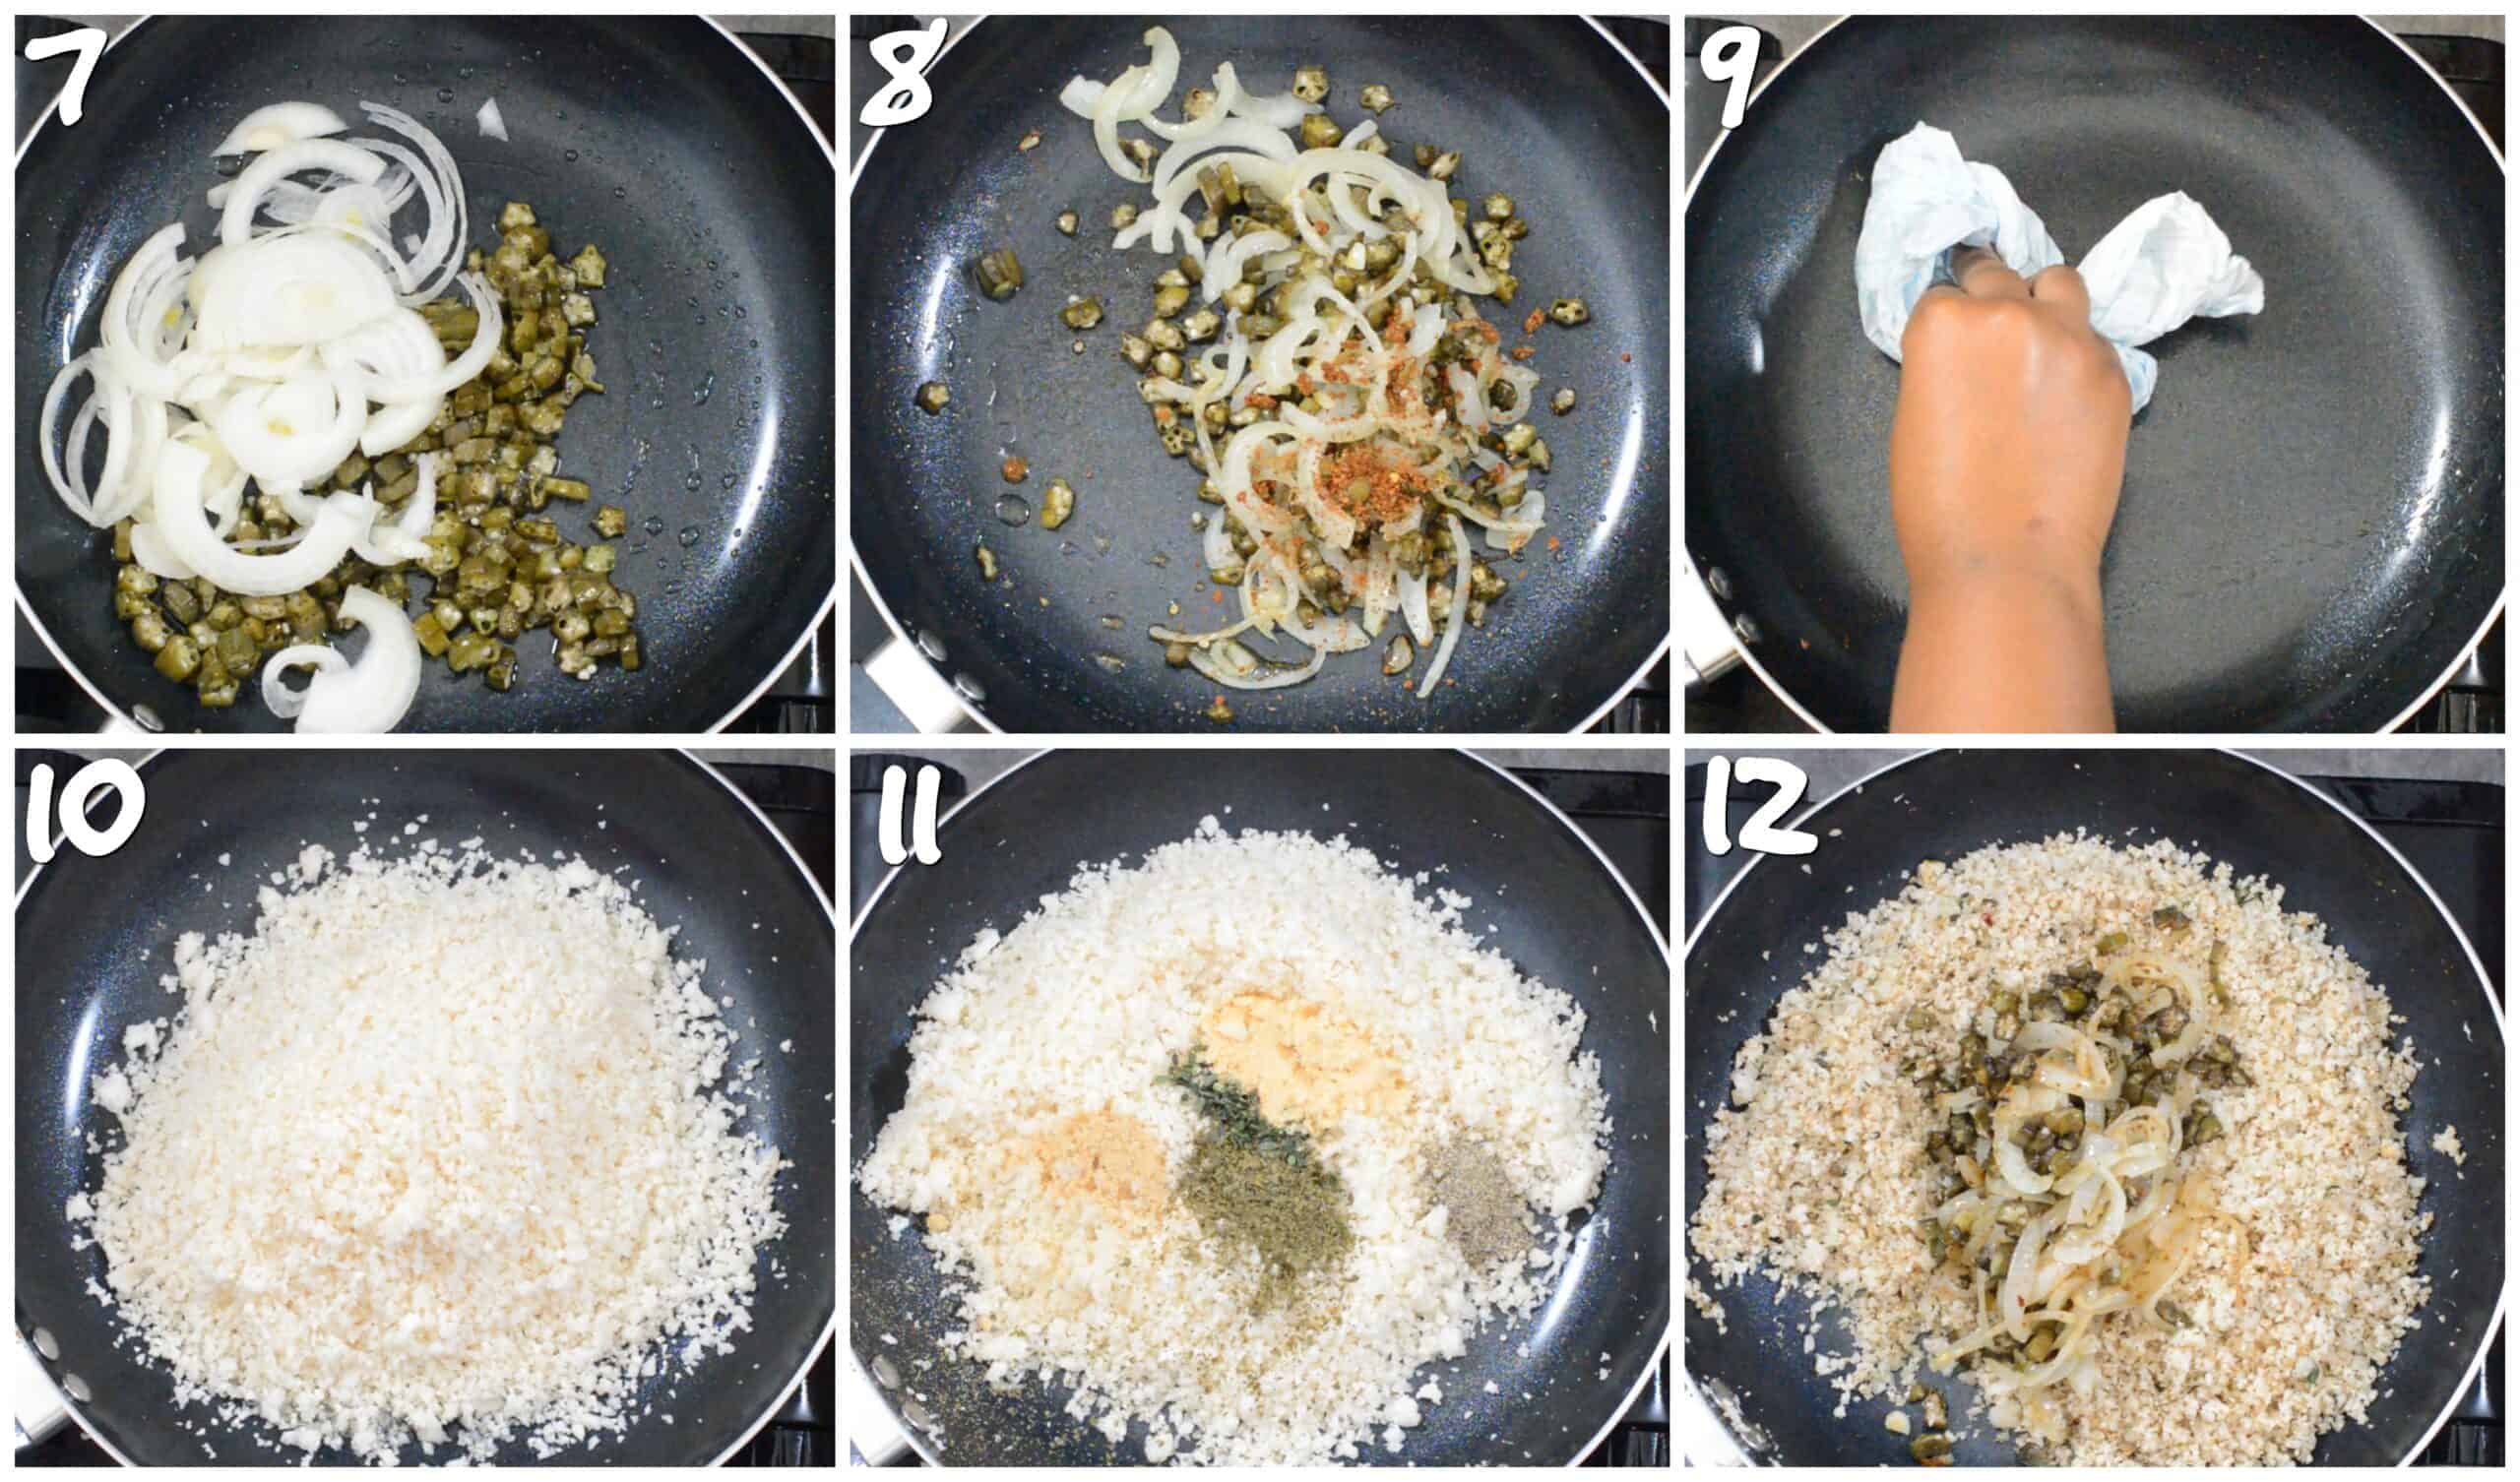 steps7-12 cooking the cauliflower rice, spices and okra